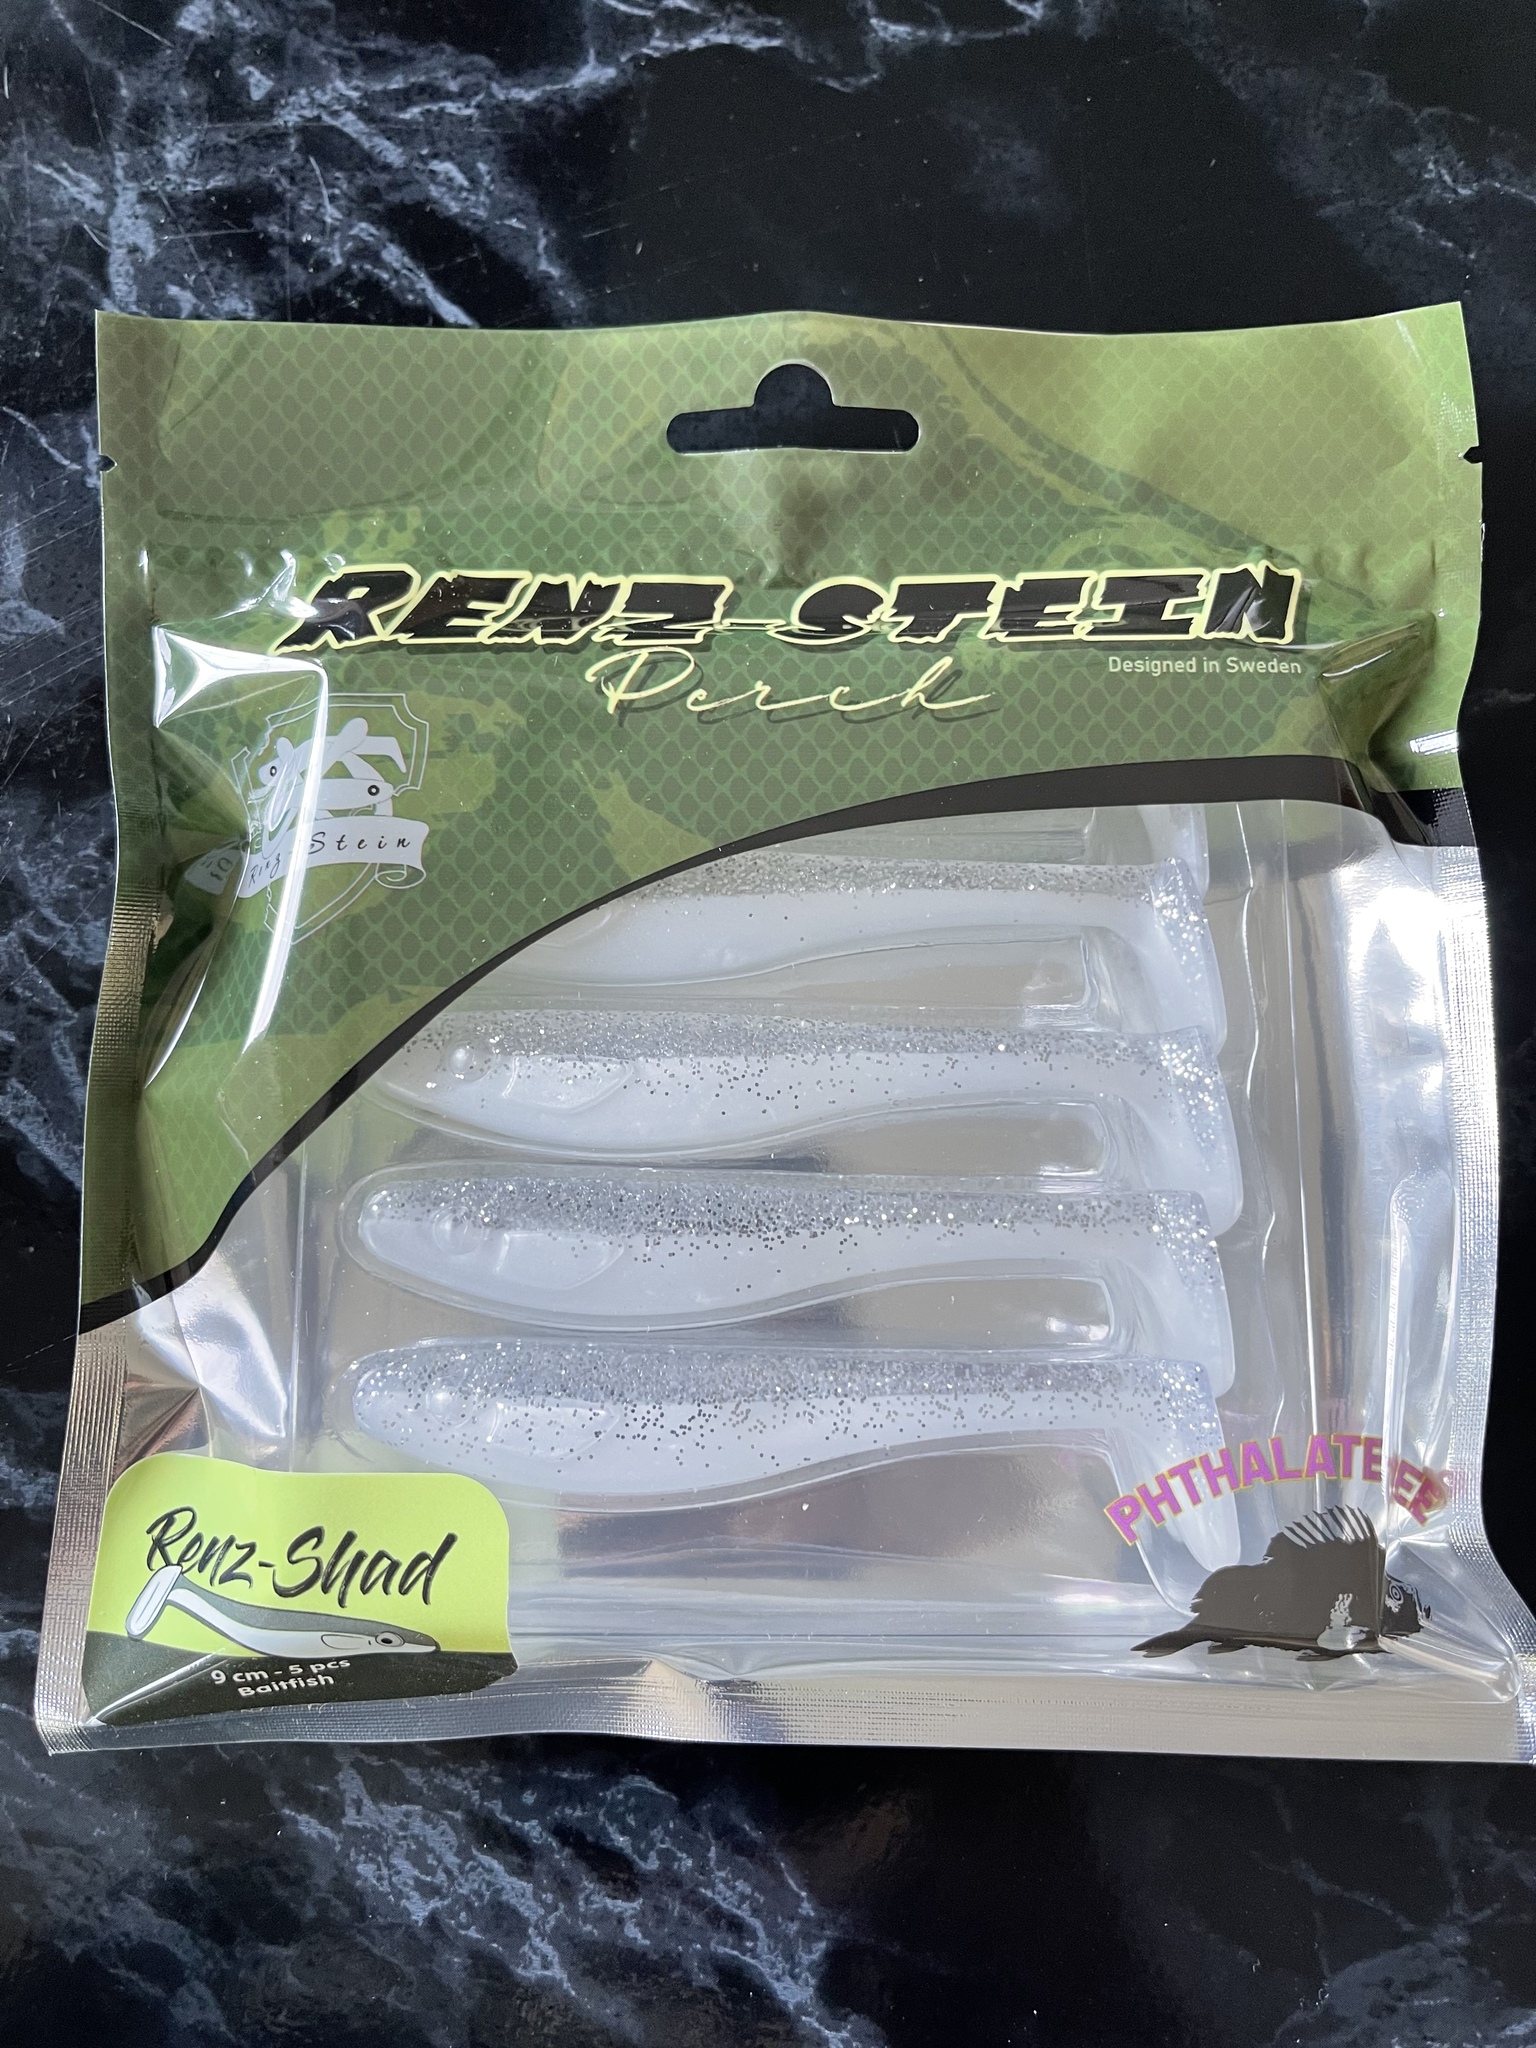 Renzshad perch 5-pack